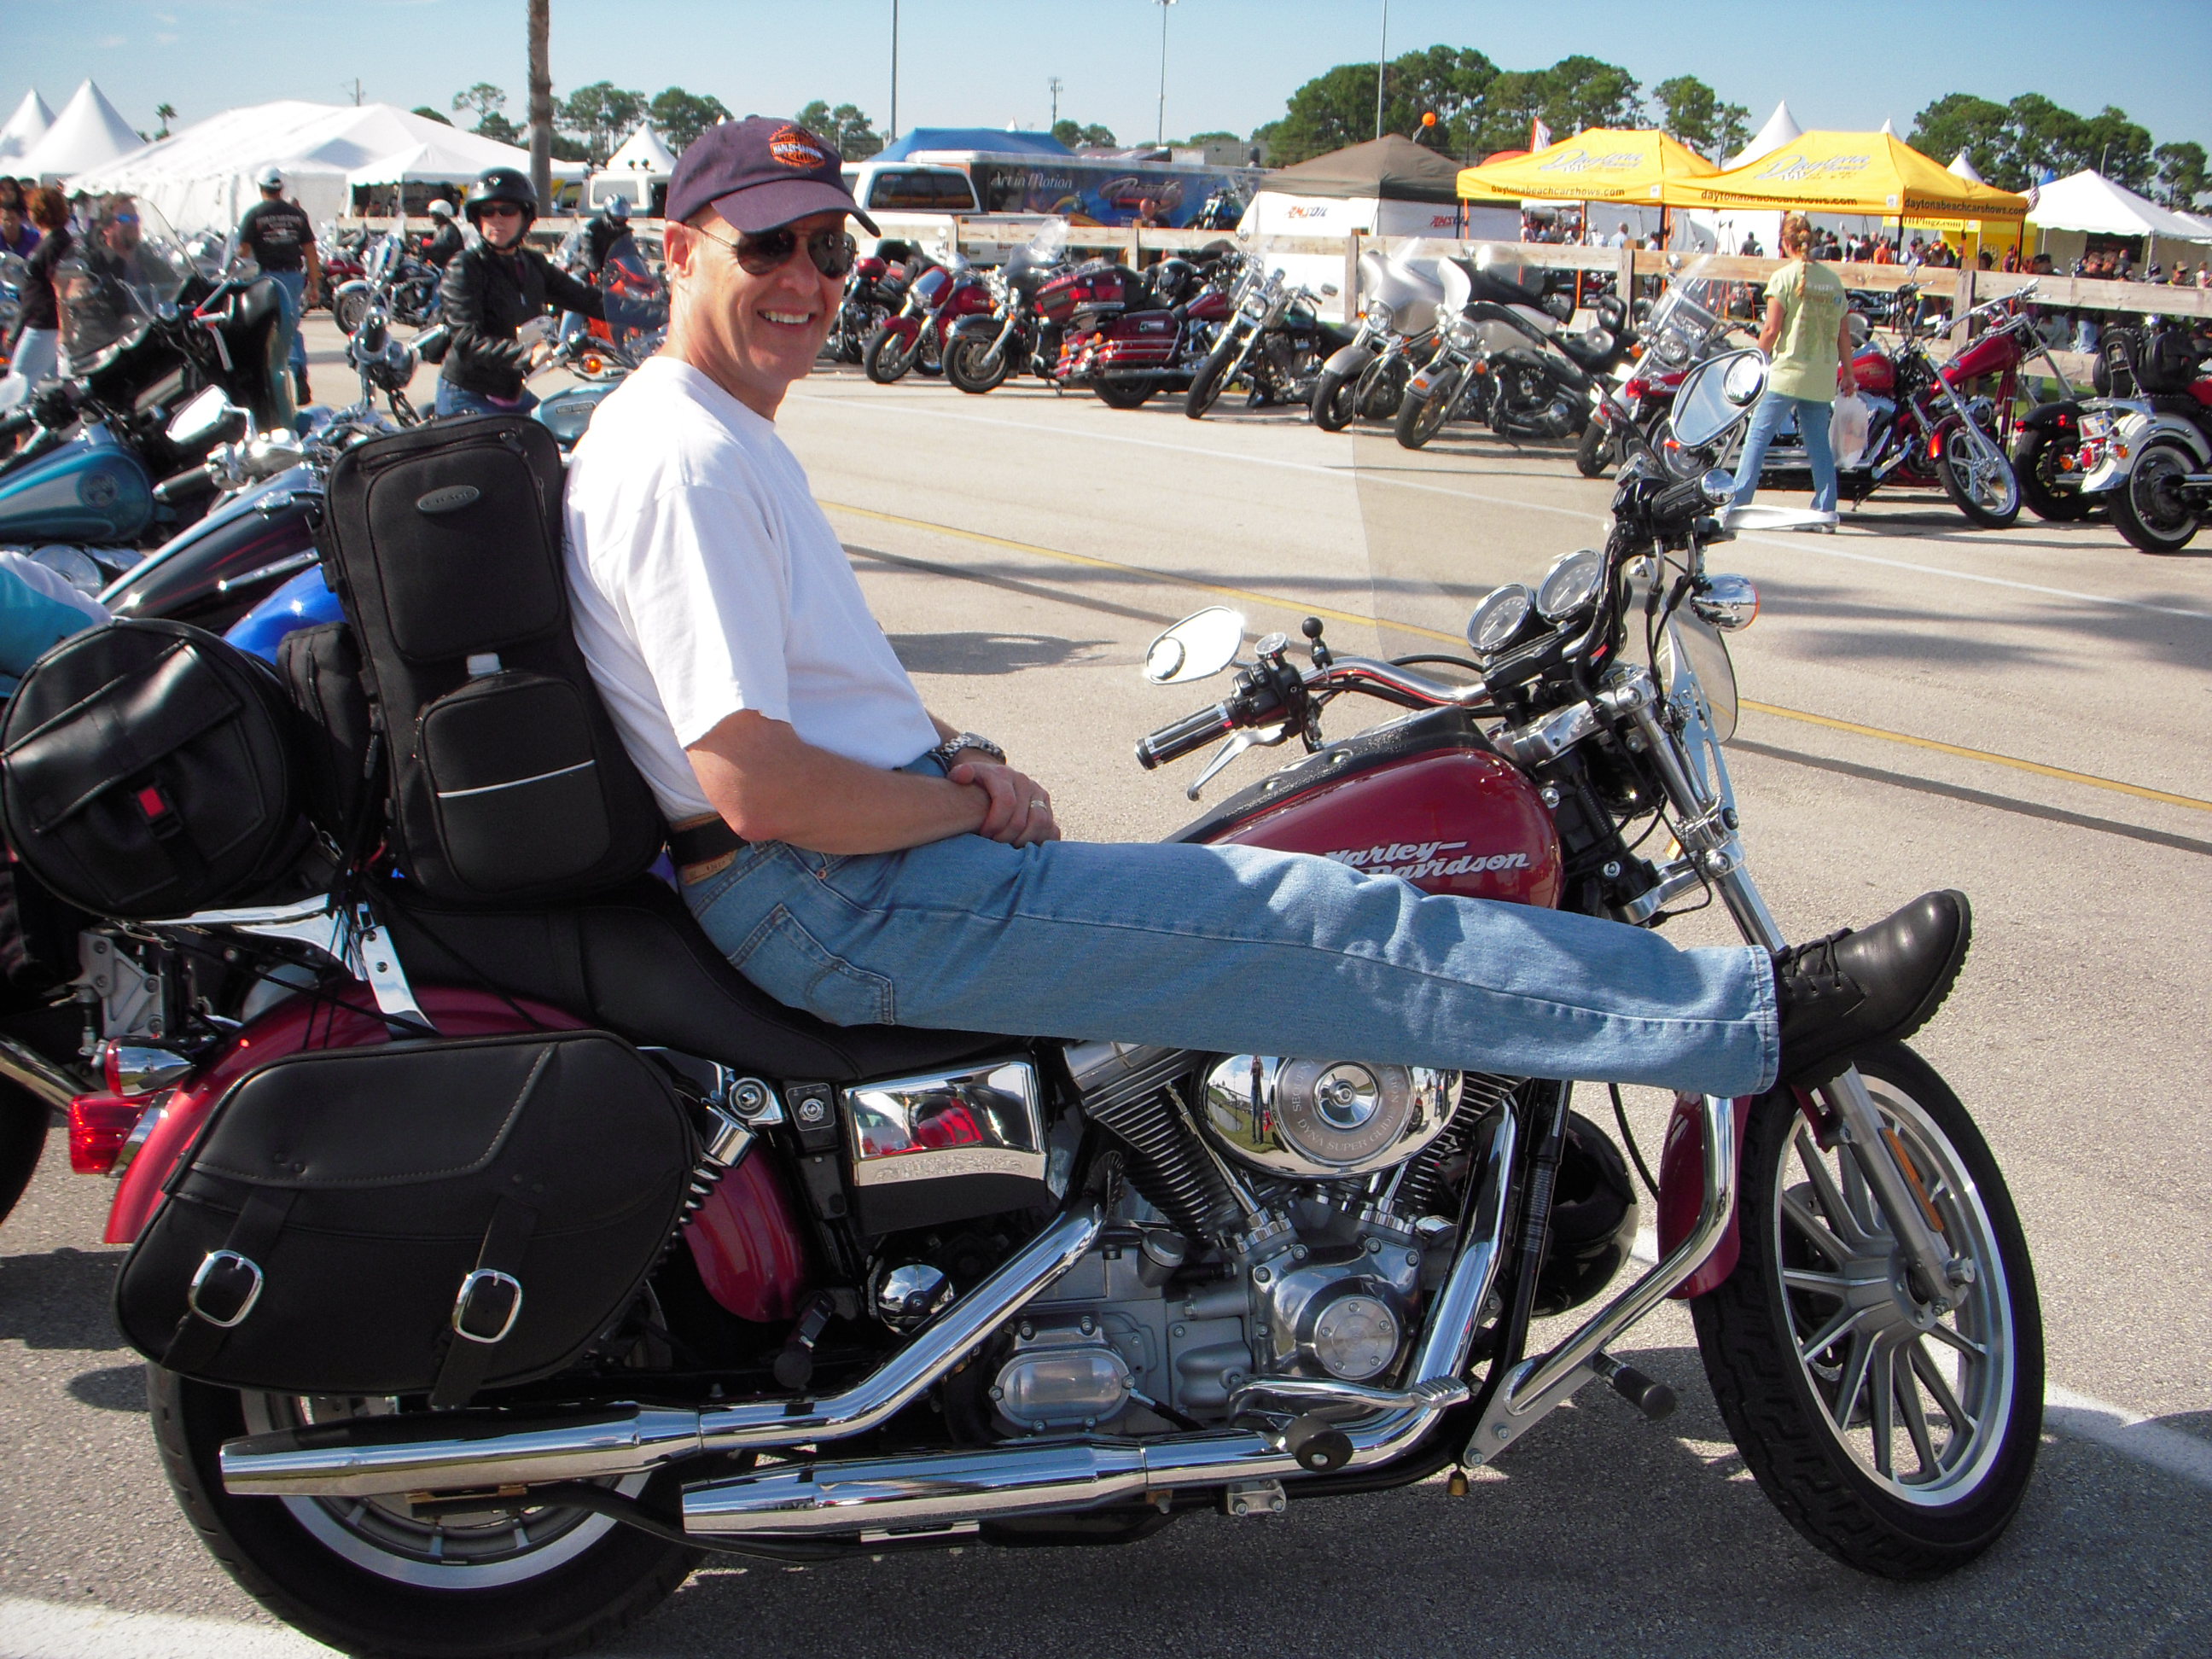 Yours truly at Biketoberfest 2009